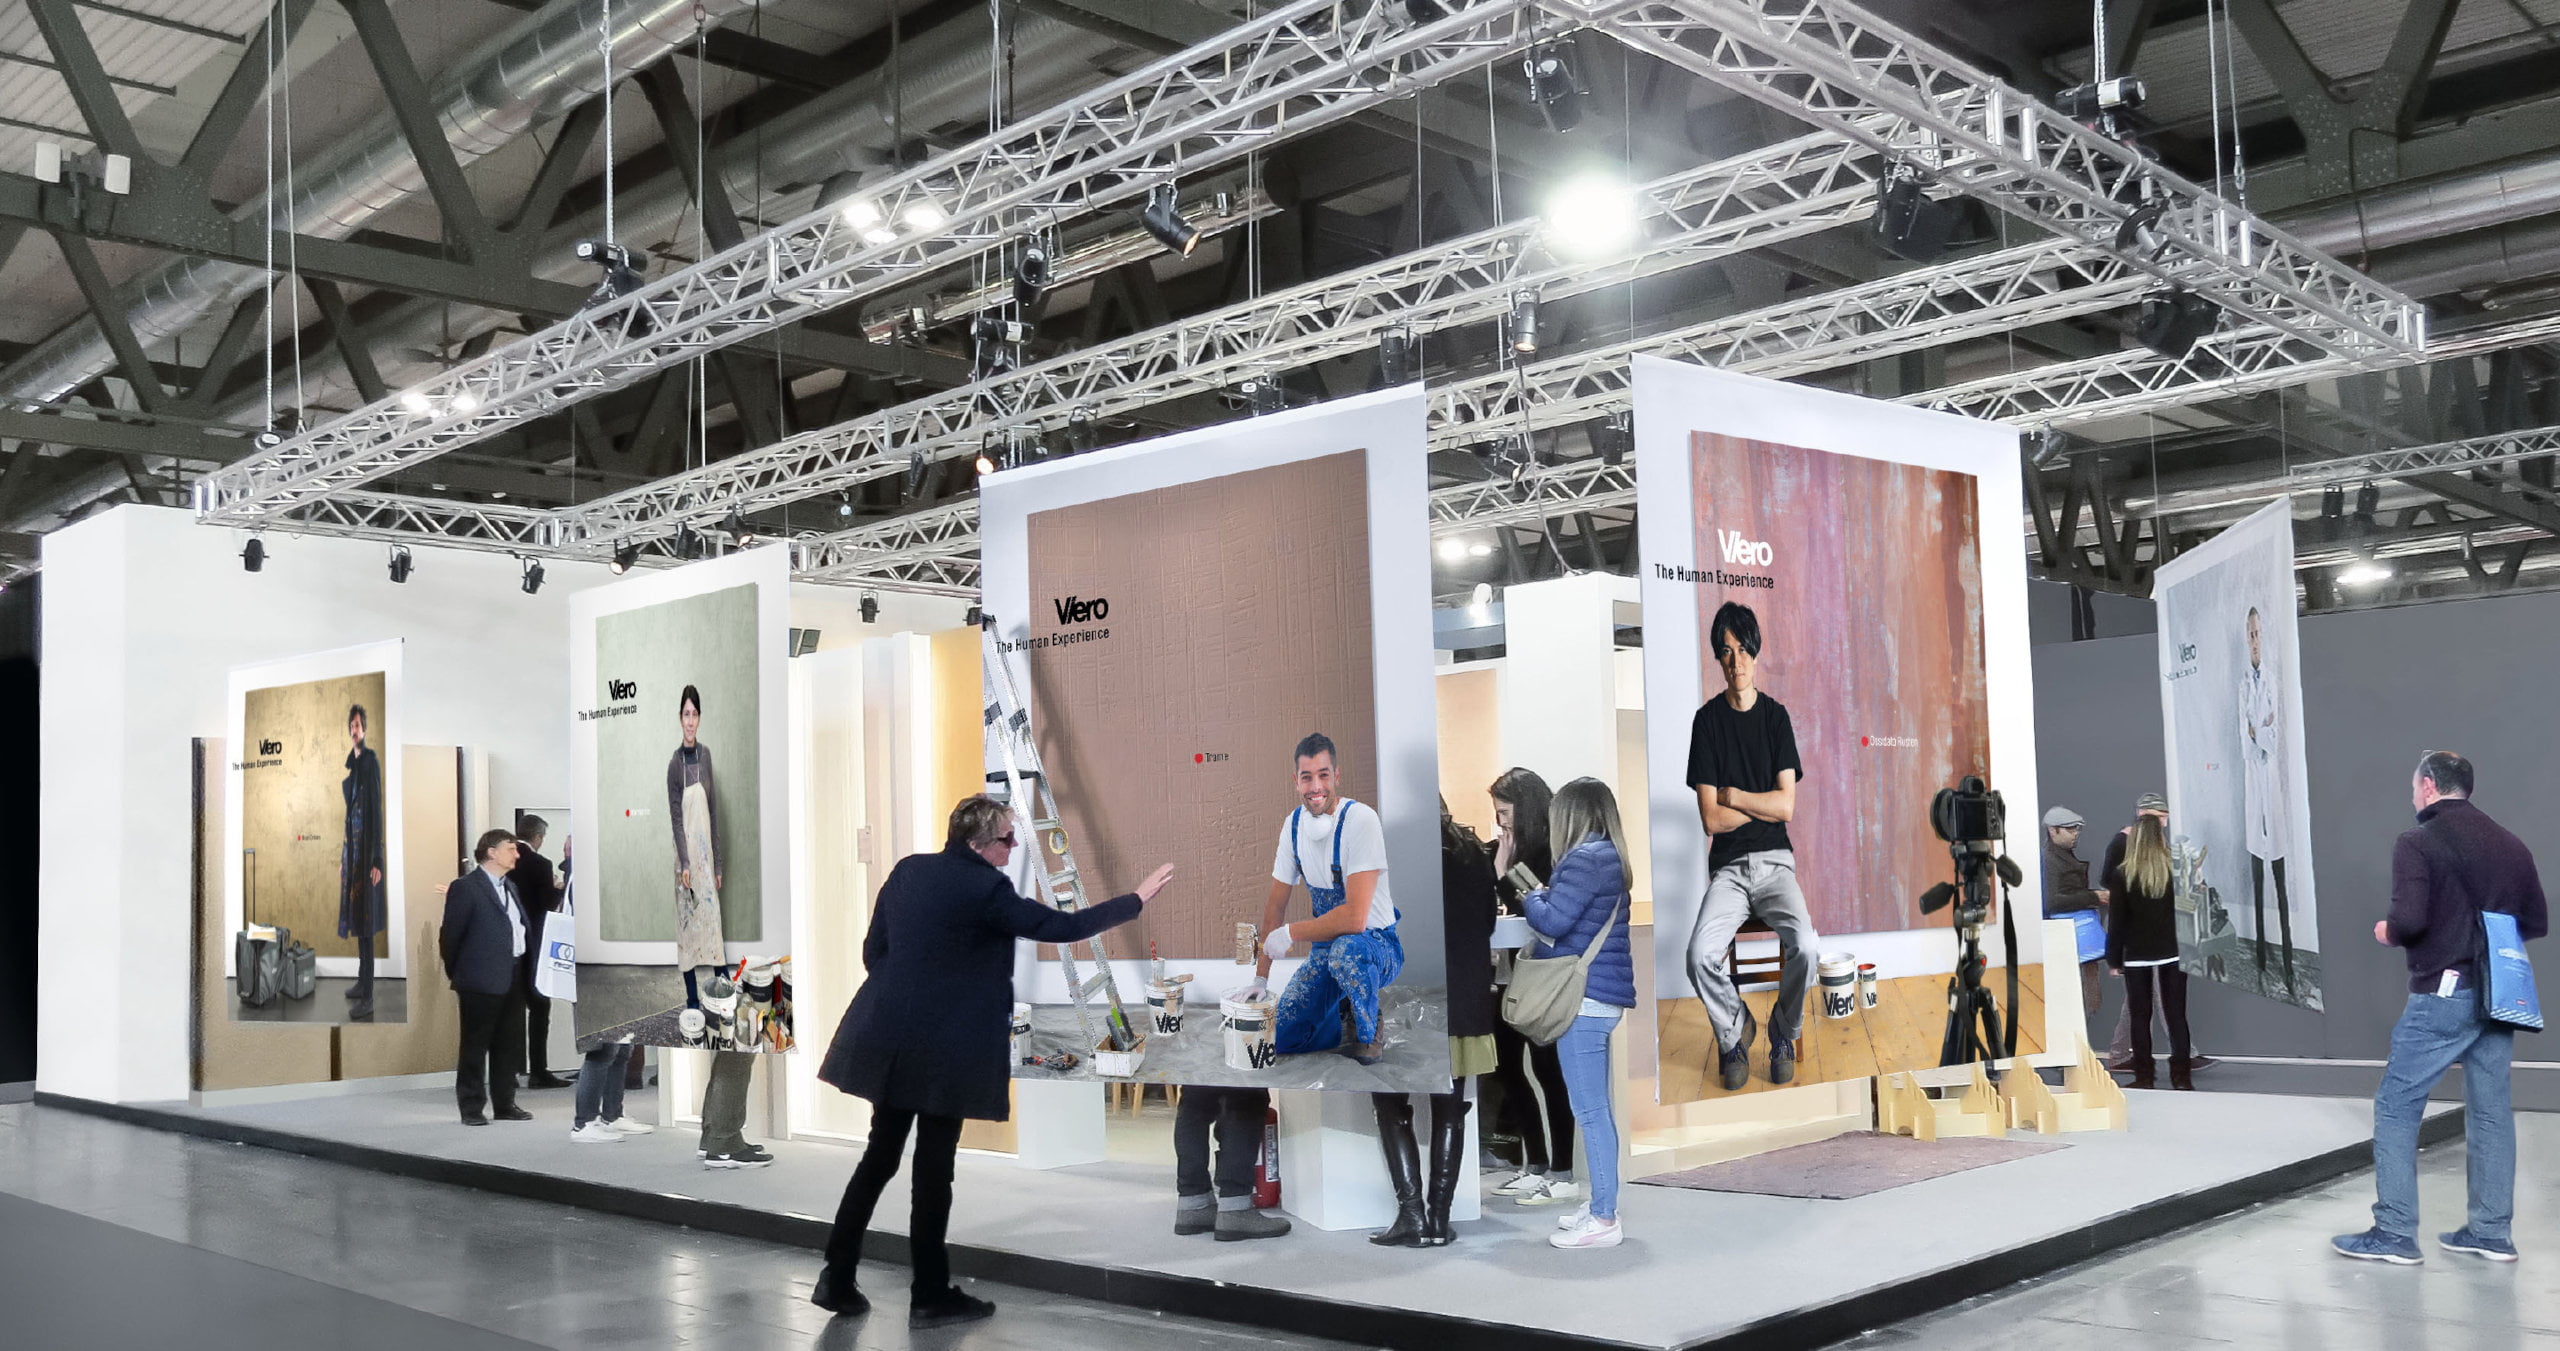 Viero Paints Image Campaign and Exhibition at Expo in Milan